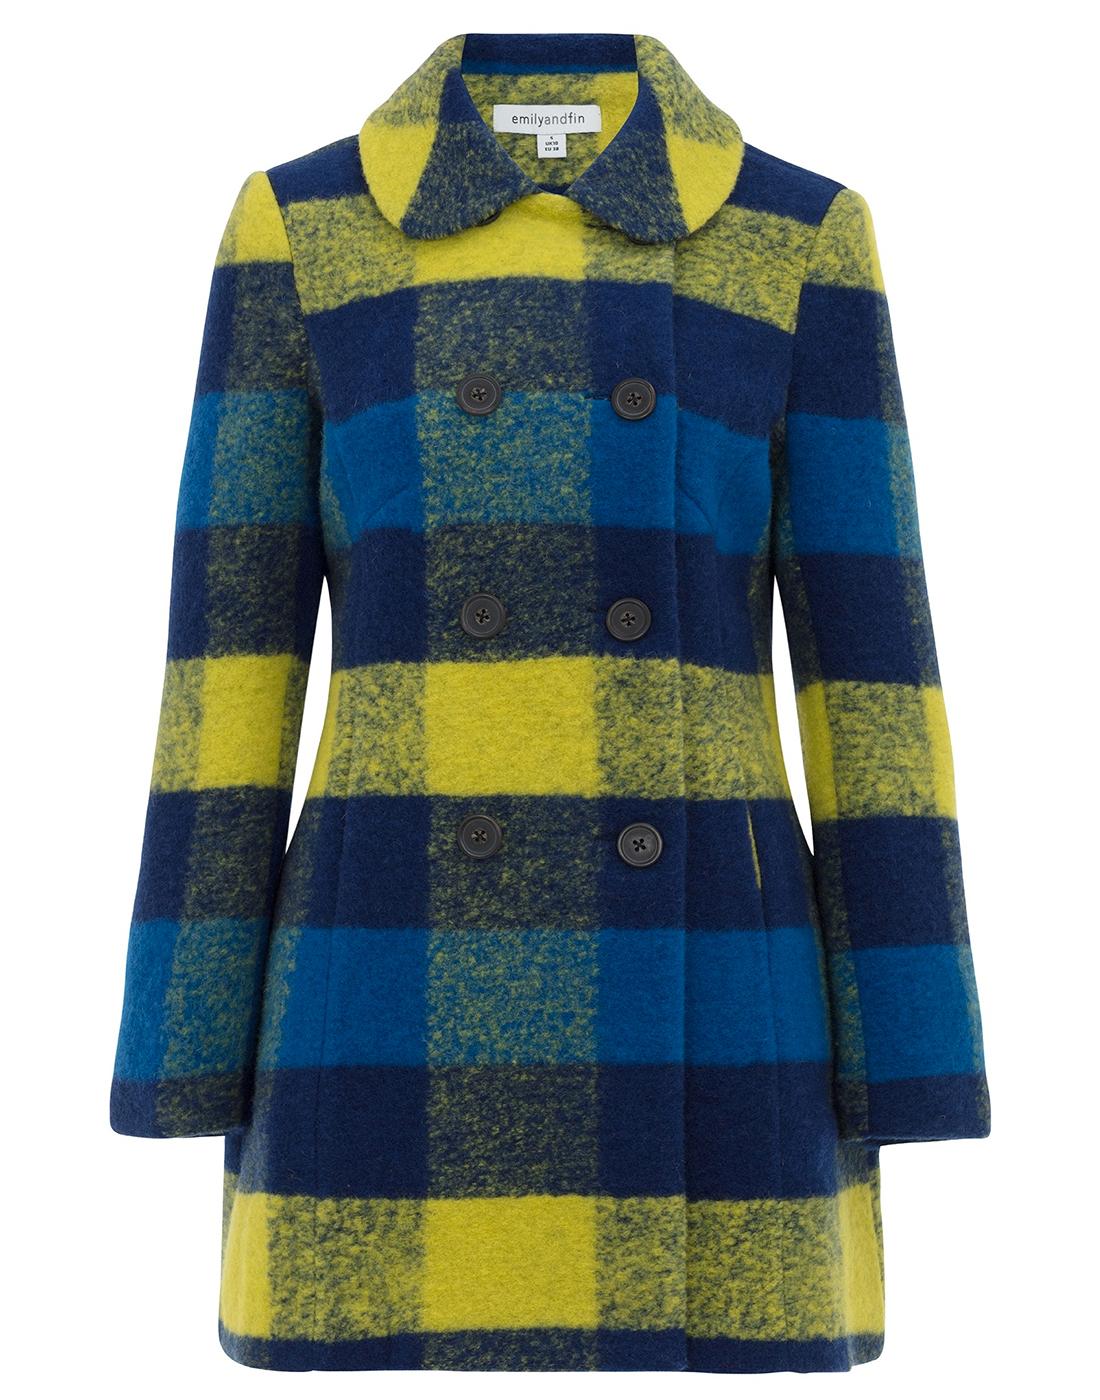 Lydia EMILY AND FIN Retro Vintage Wool Winter Coat